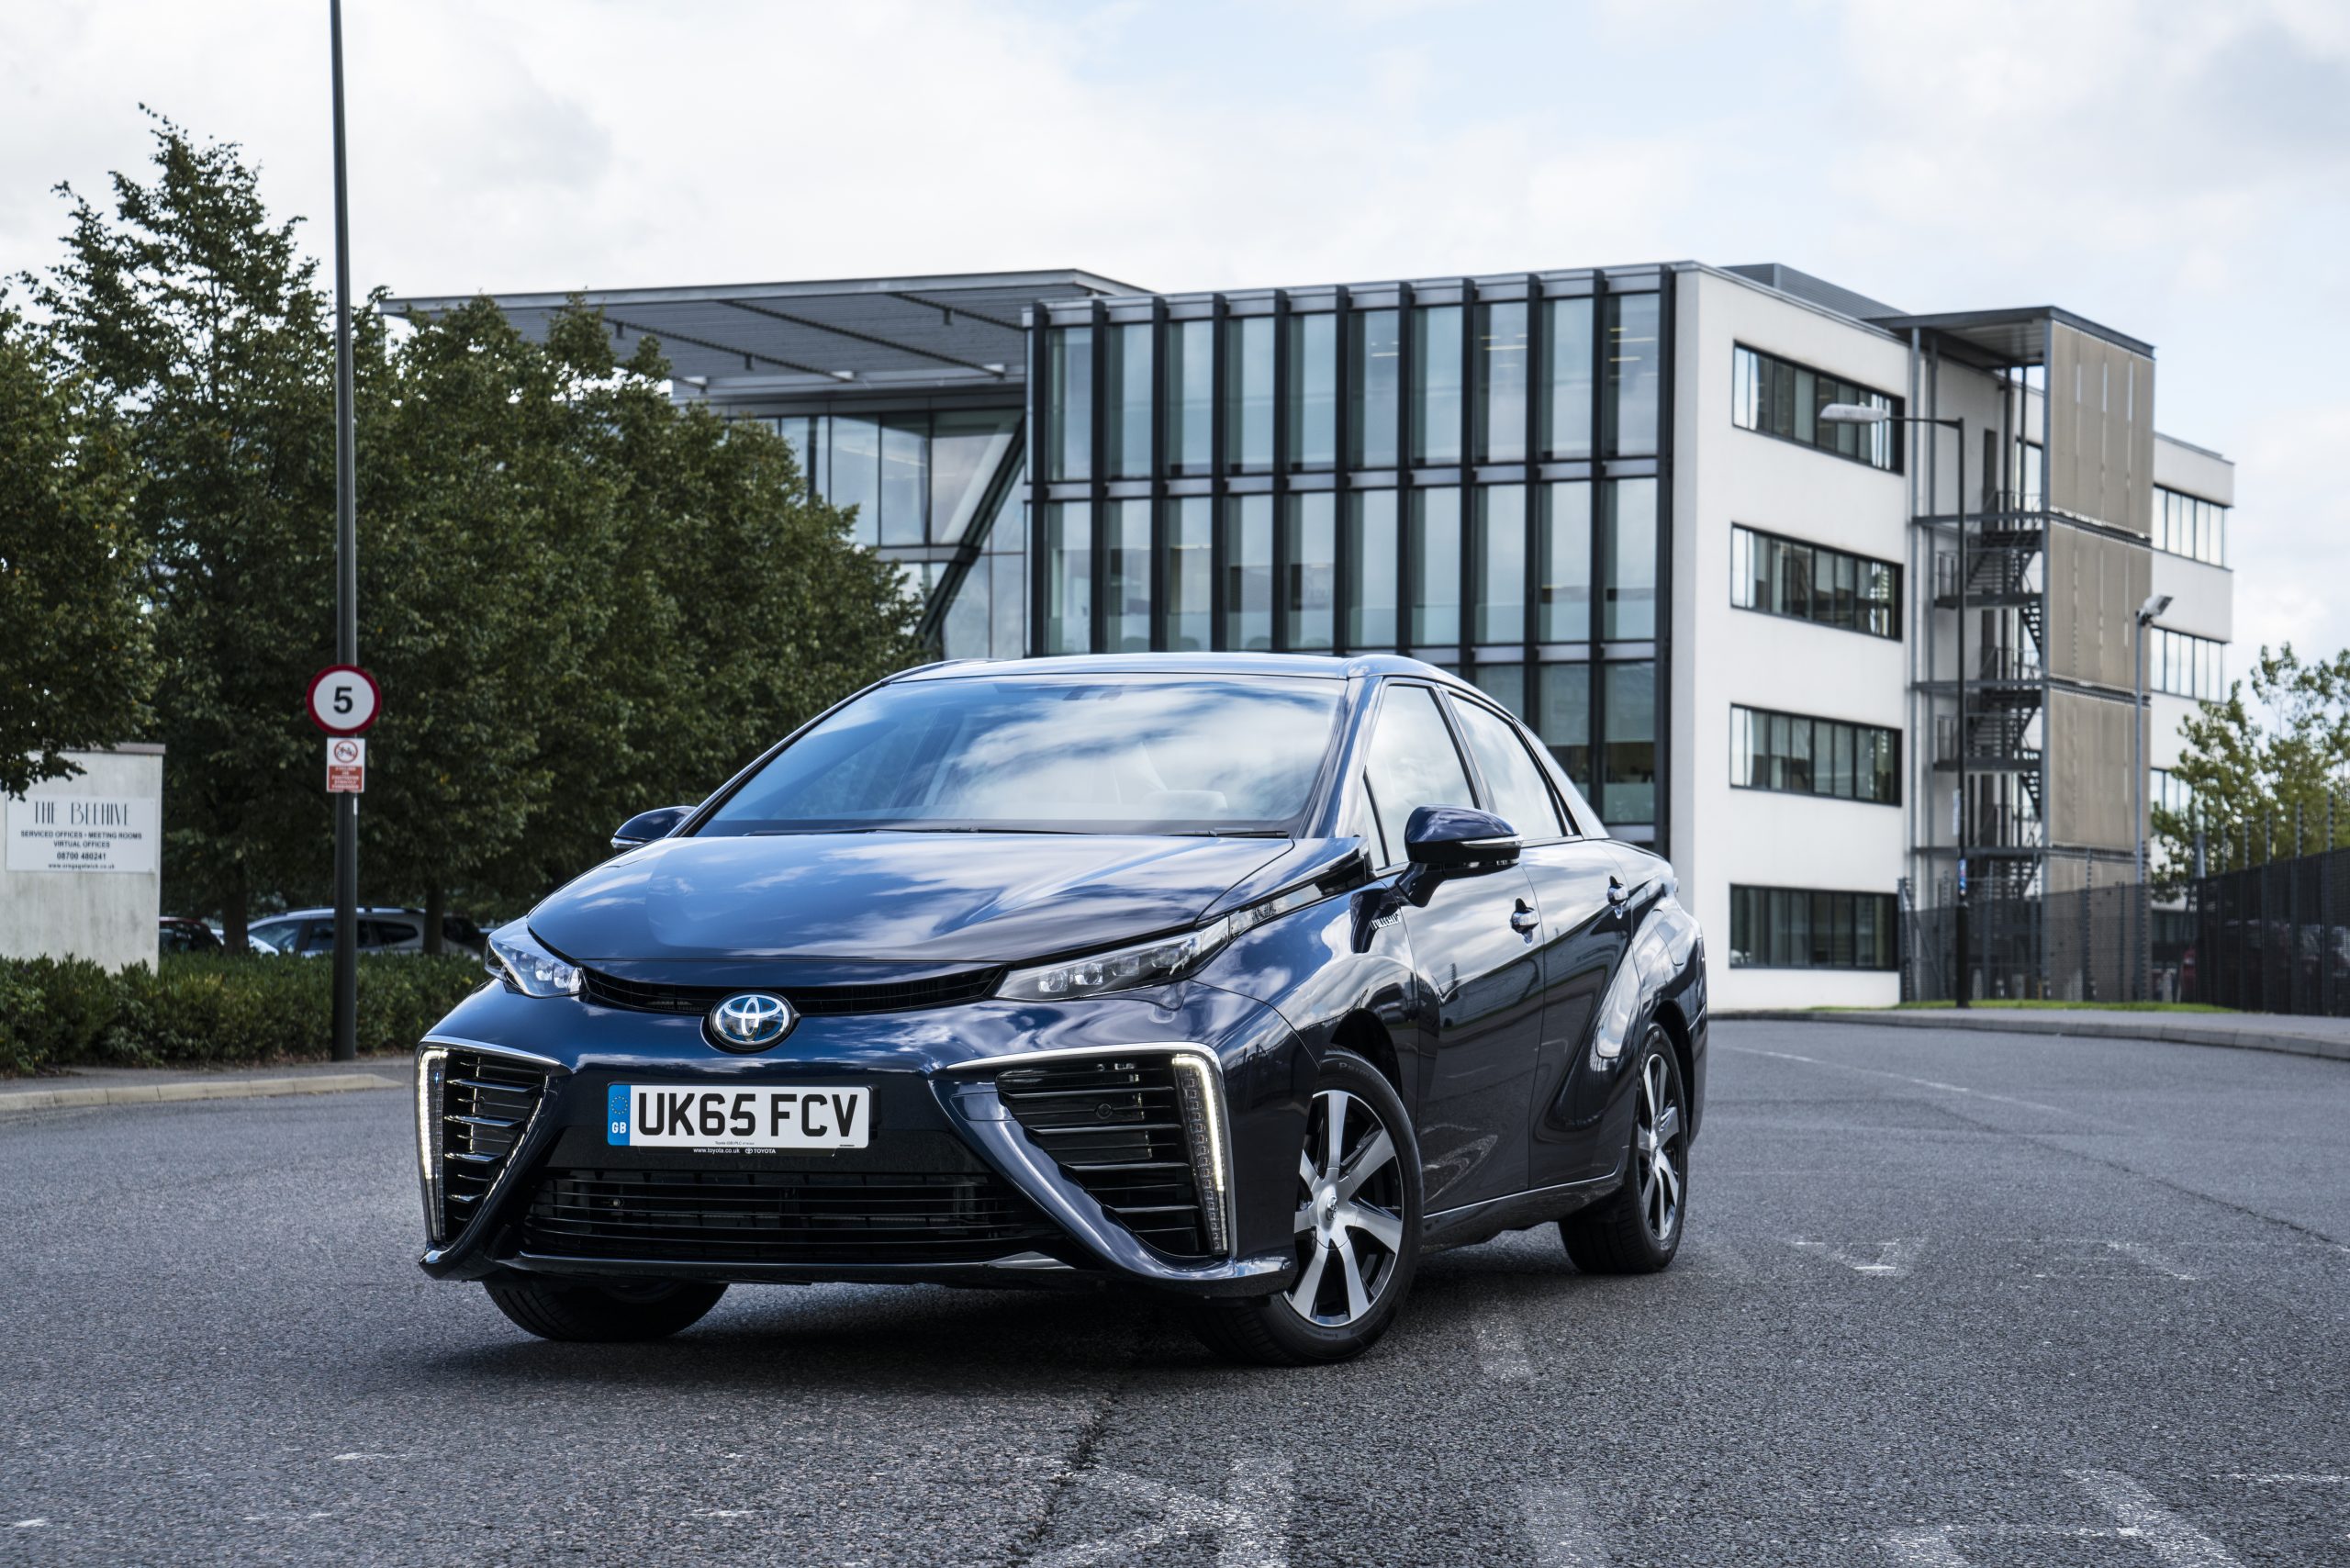 Hydrogen Cars: The Future of the UK Car Industry?